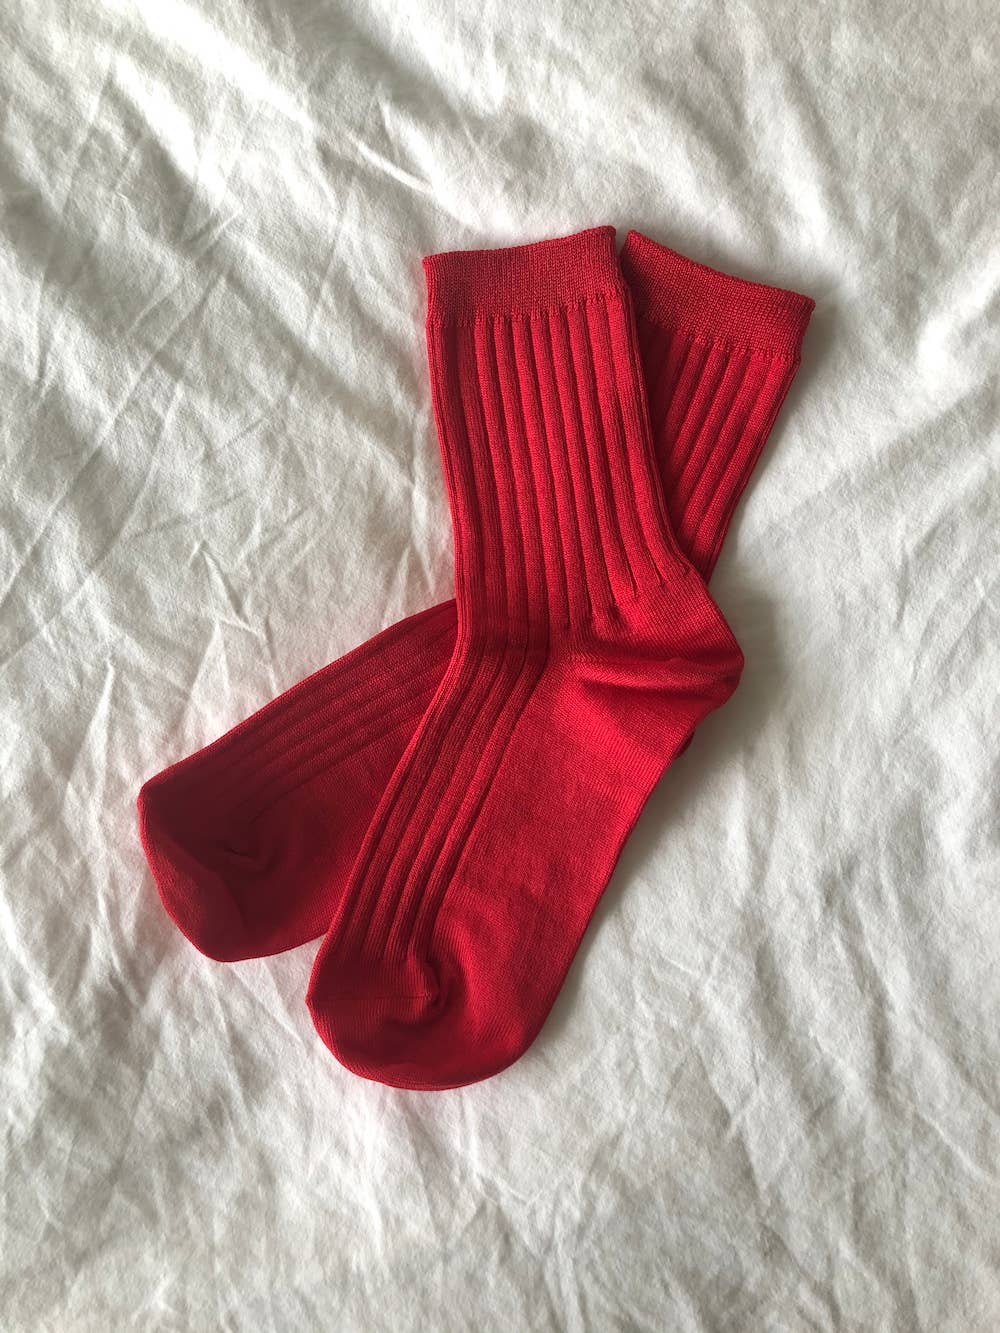 Her Socks - Classic Red